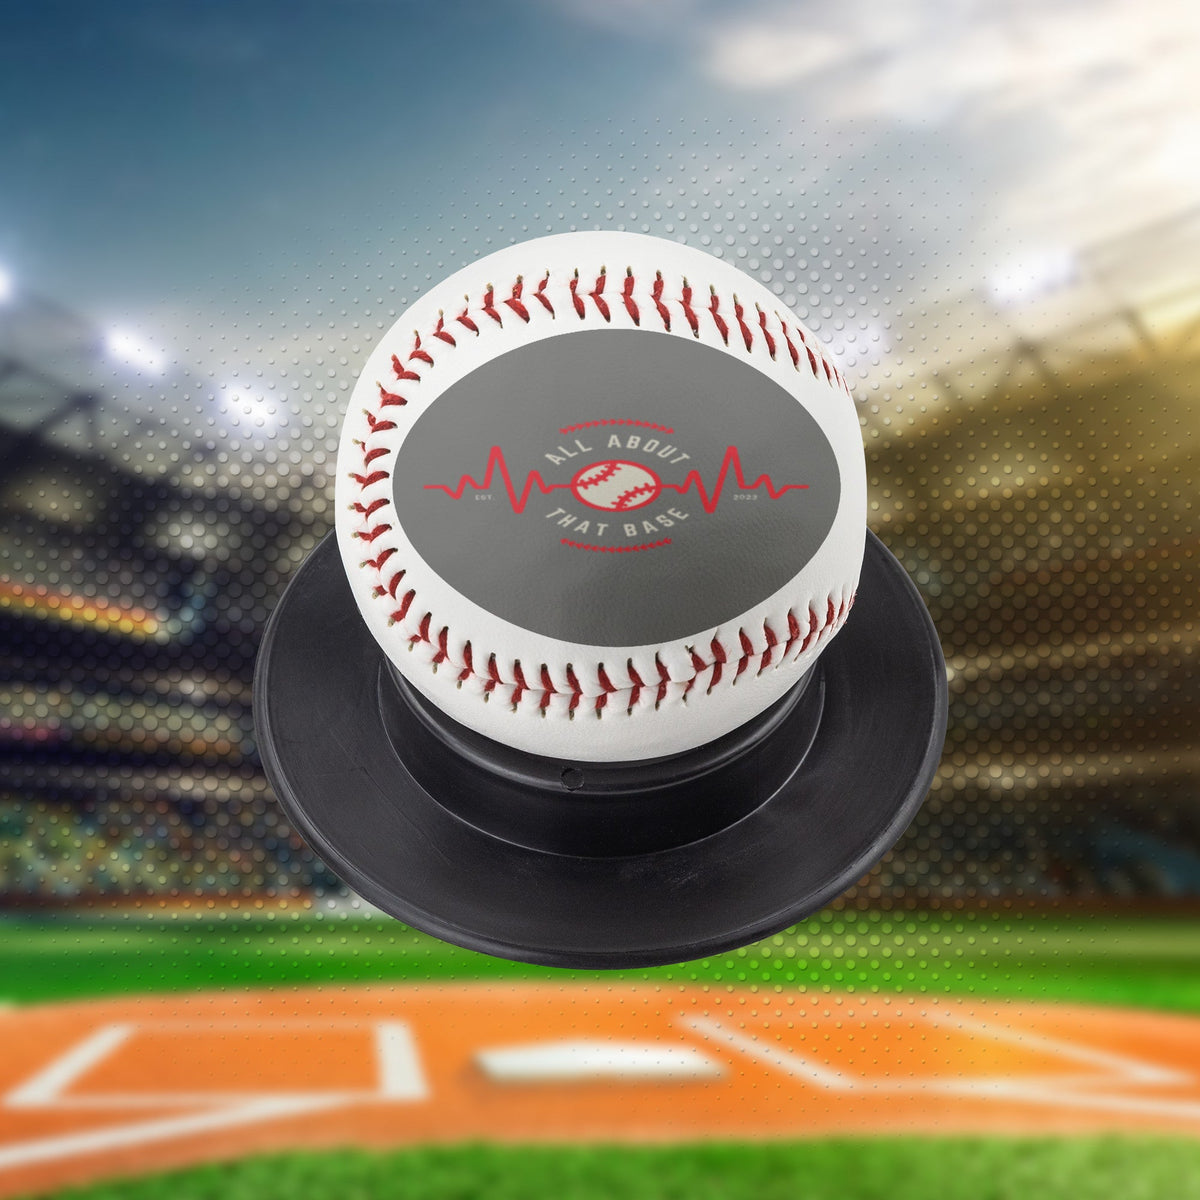 All About Baseball | Full Size Baseball | Red or Blue Thread - abrandilion